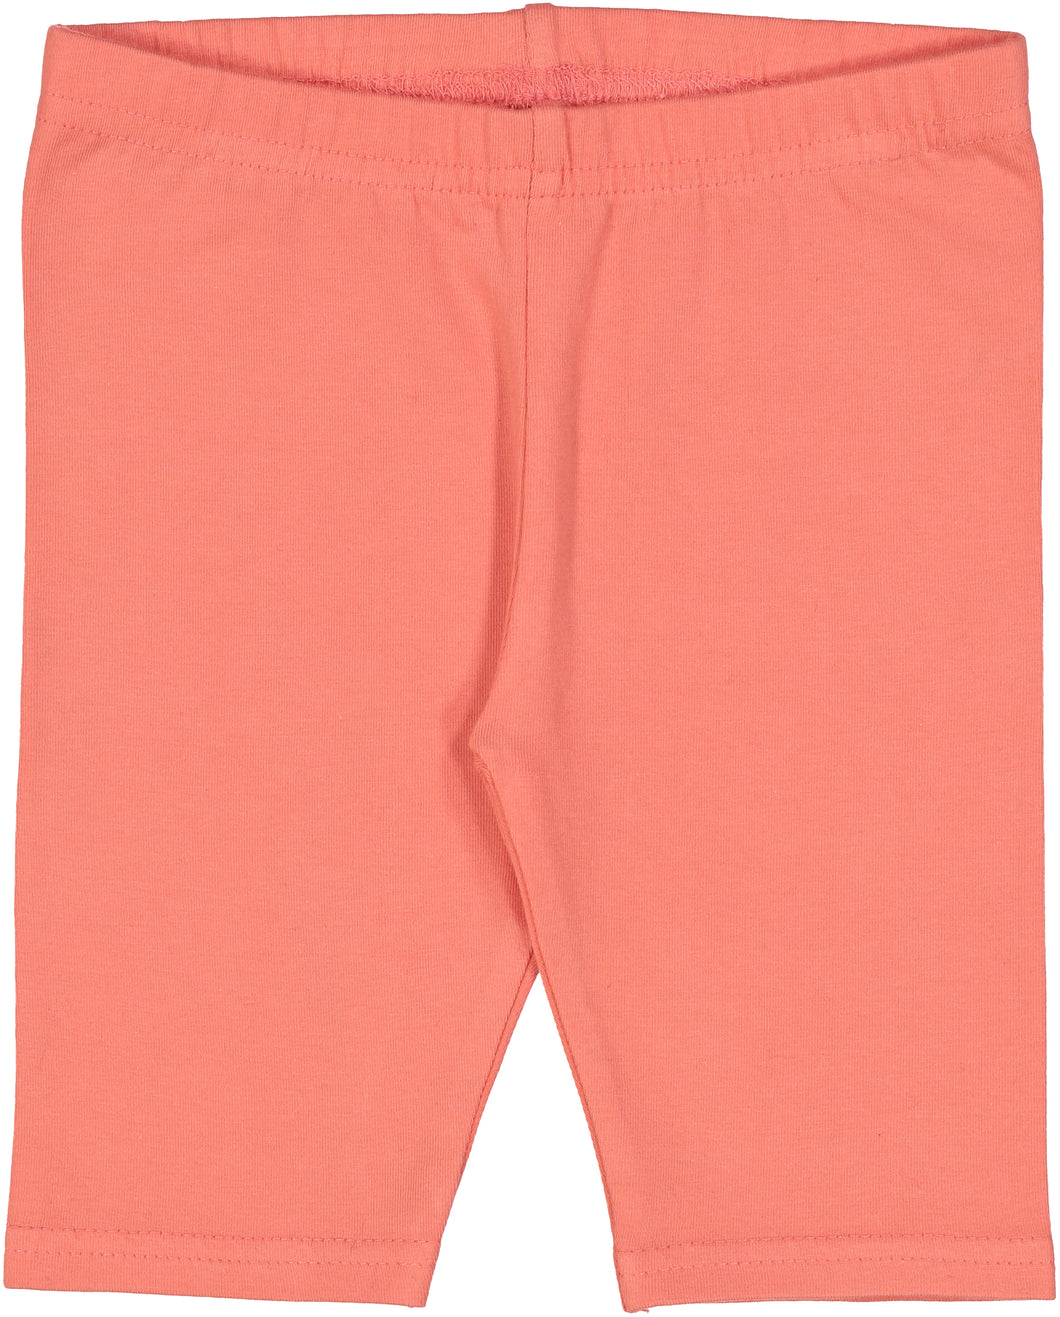 Coral Fitted Short Leggings